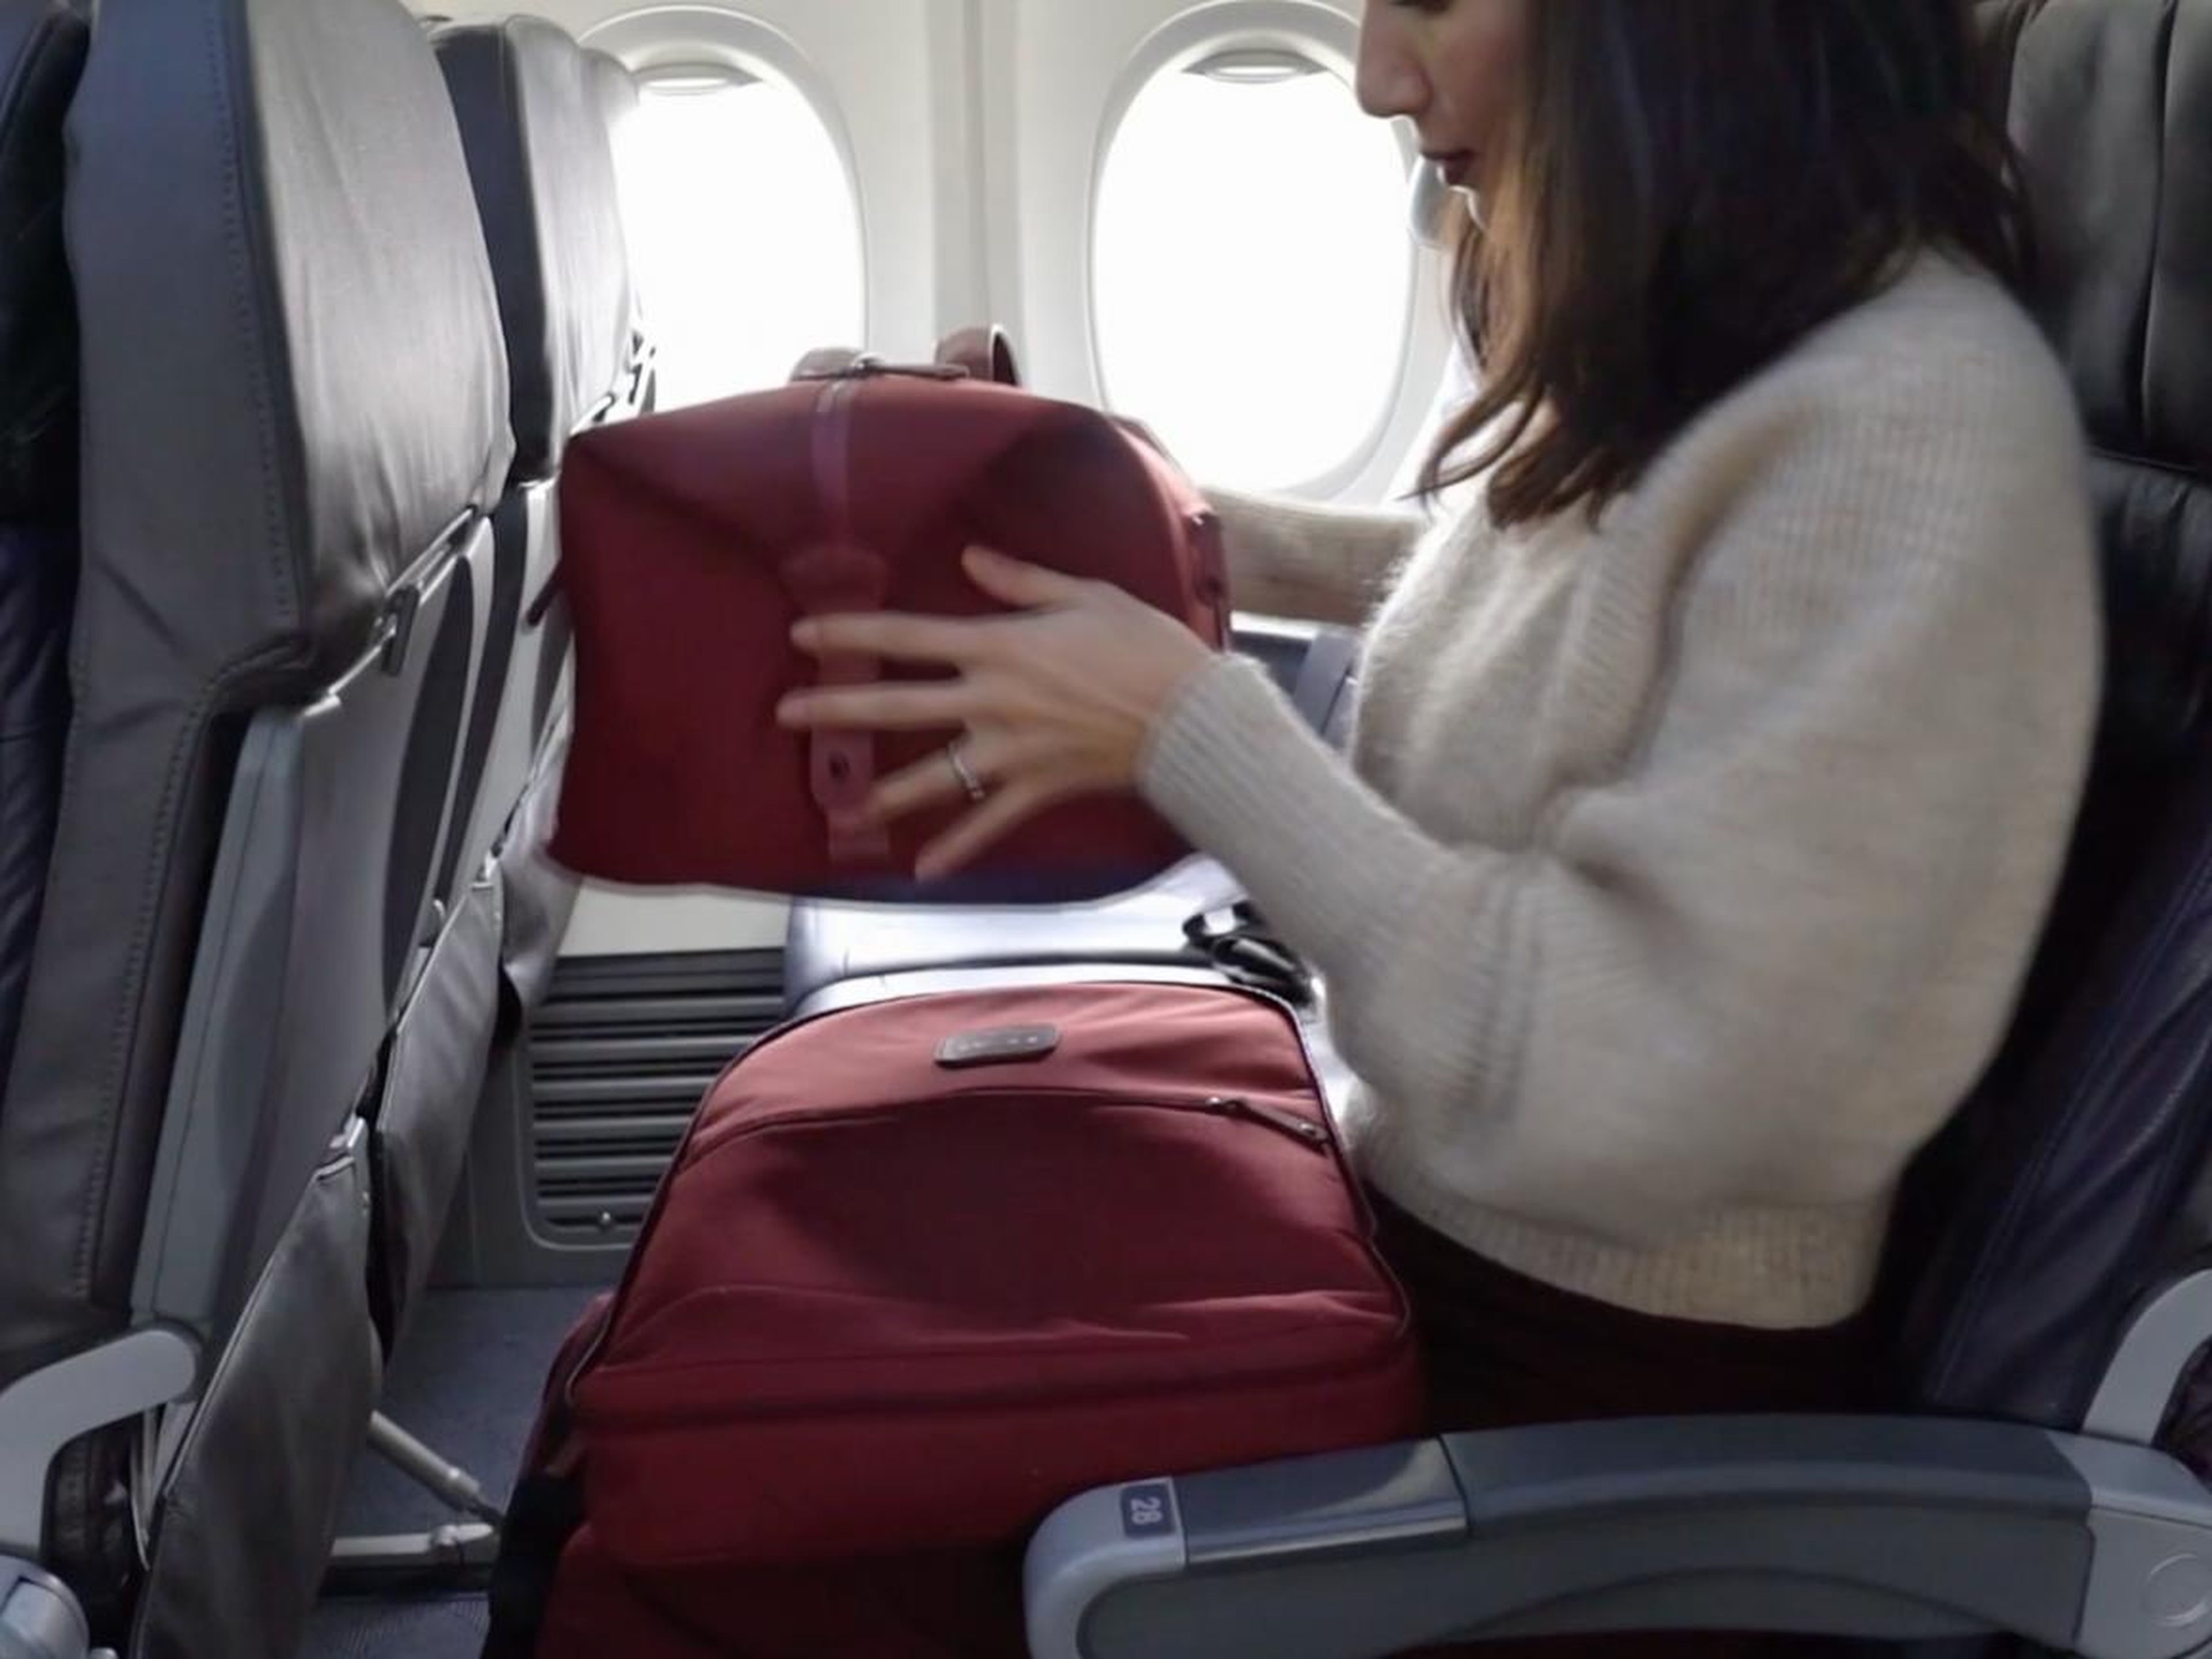 But once you're on a flight, Wool & Oak's bag handily unzips into two parts.